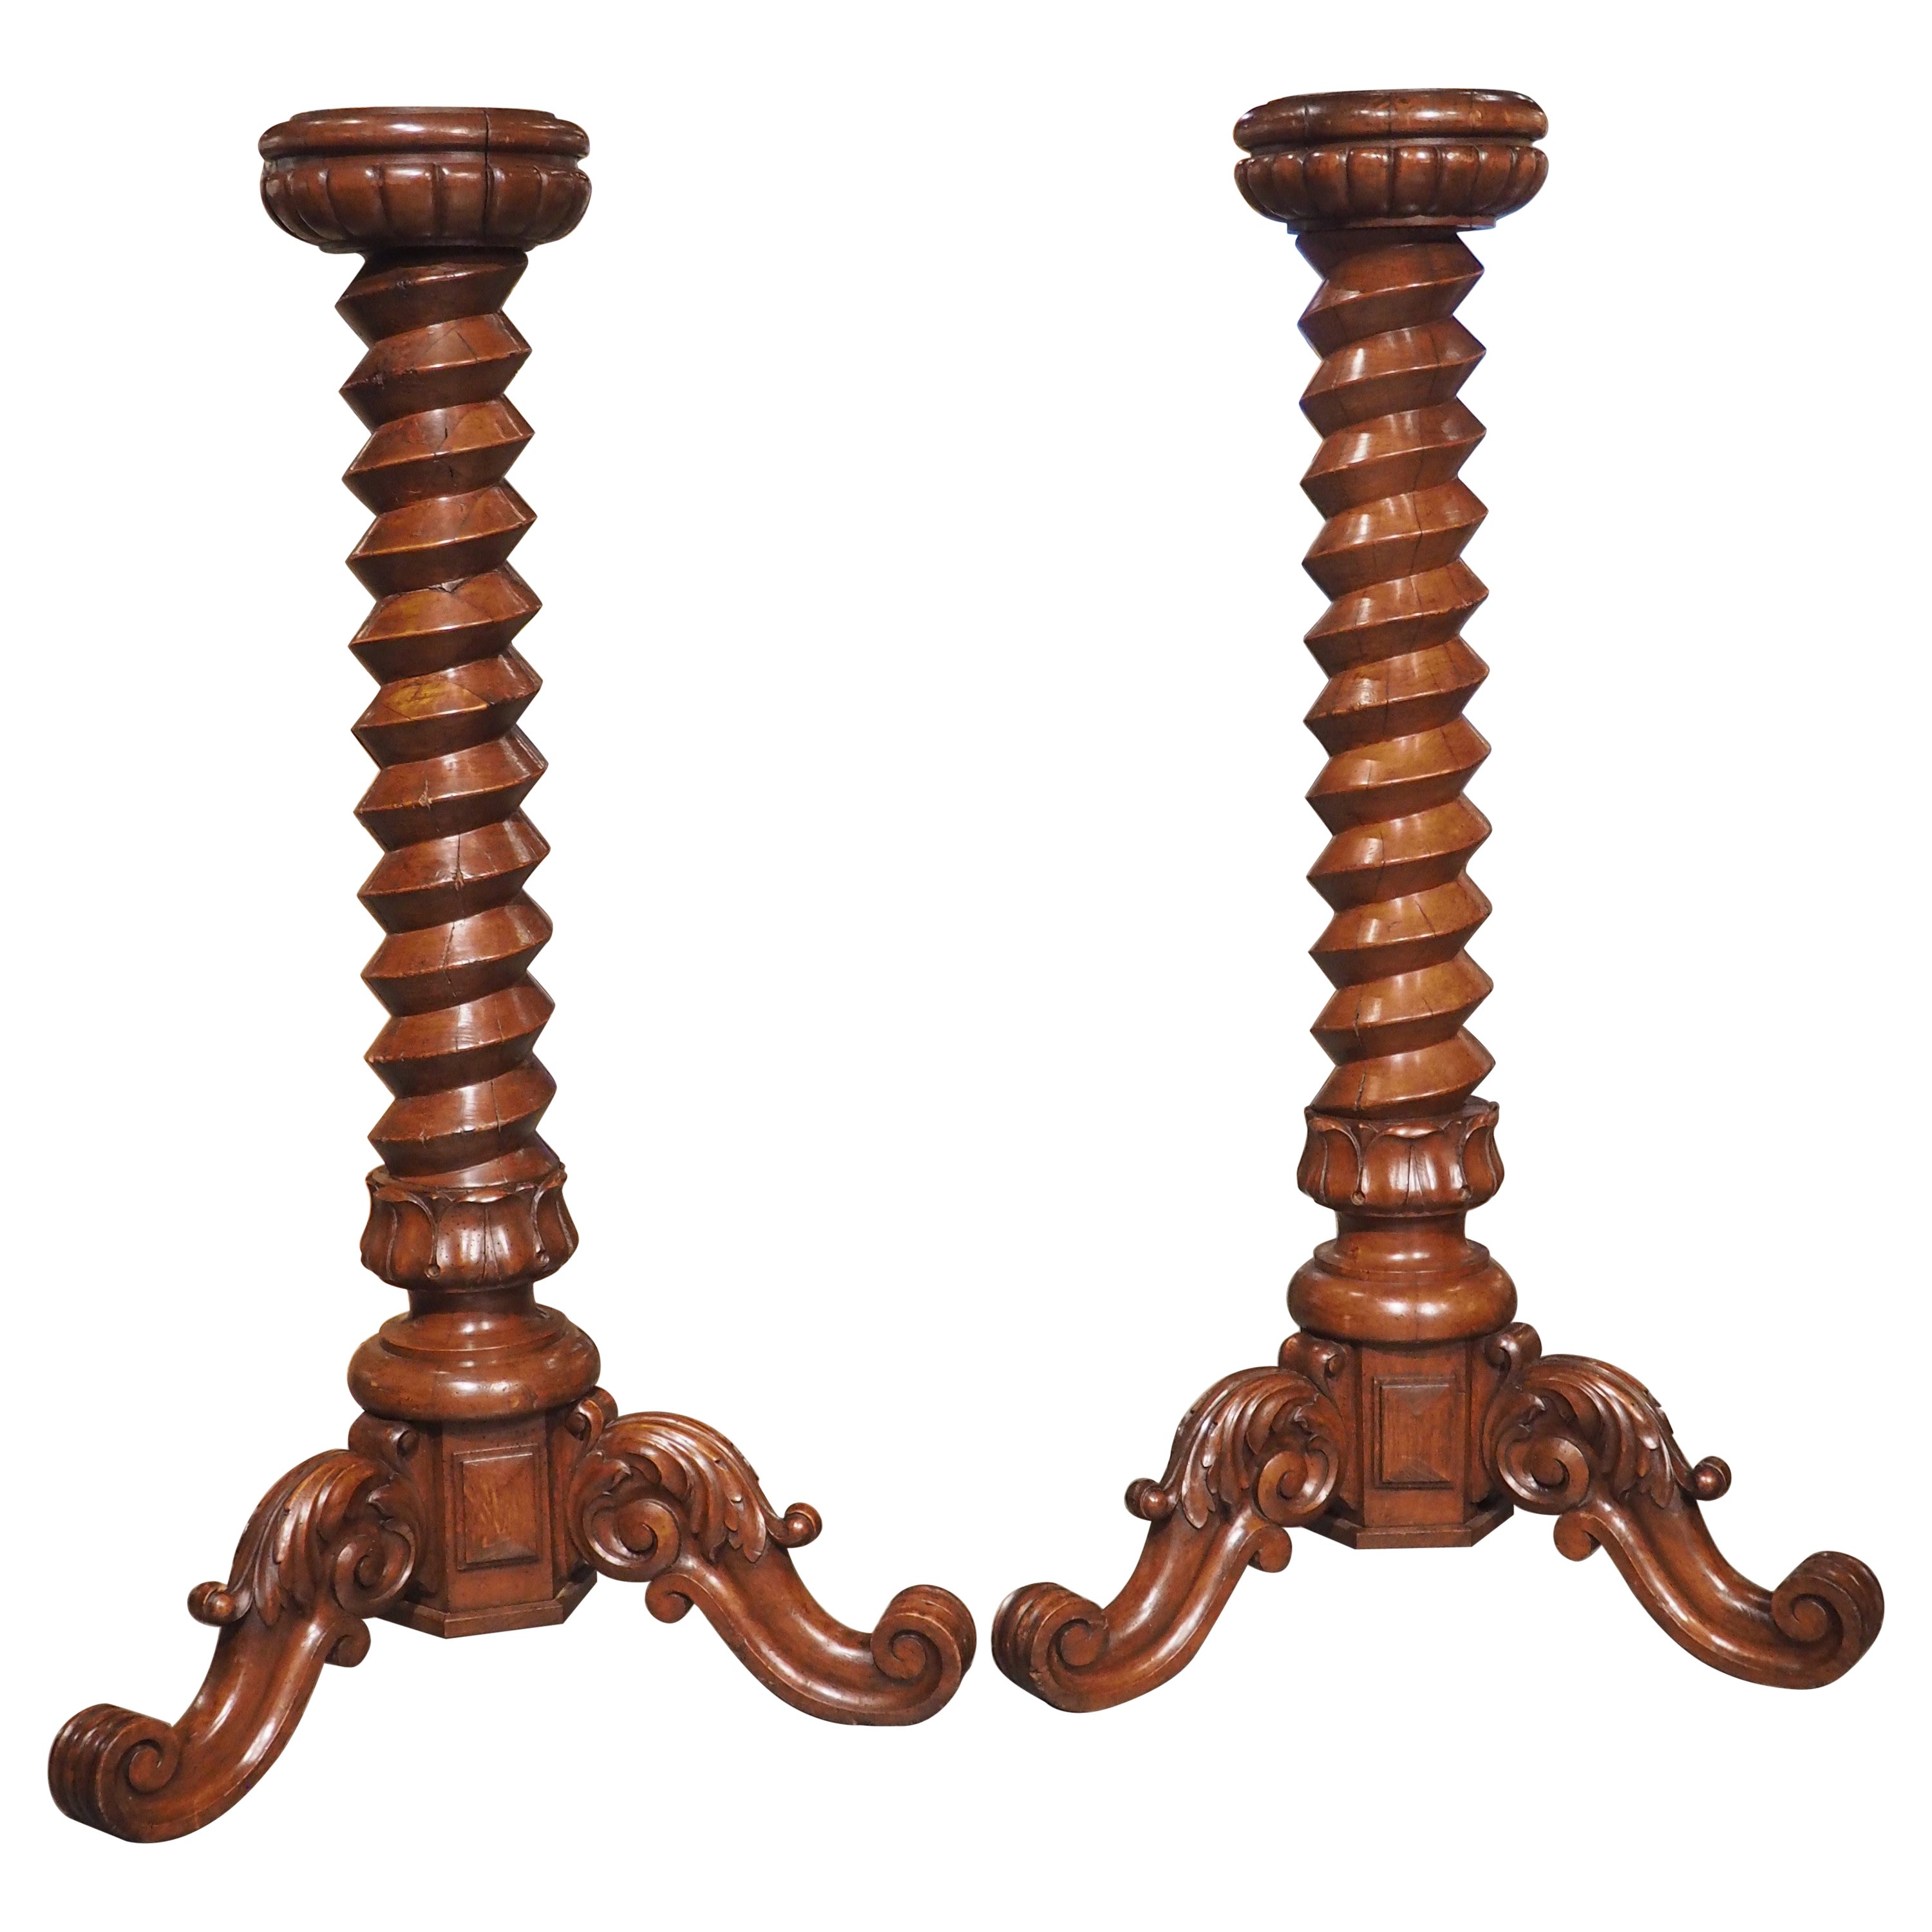 Rare Pair of Antique Wine Press Screw Sellettes in Carved Walnut, circa 1850 For Sale